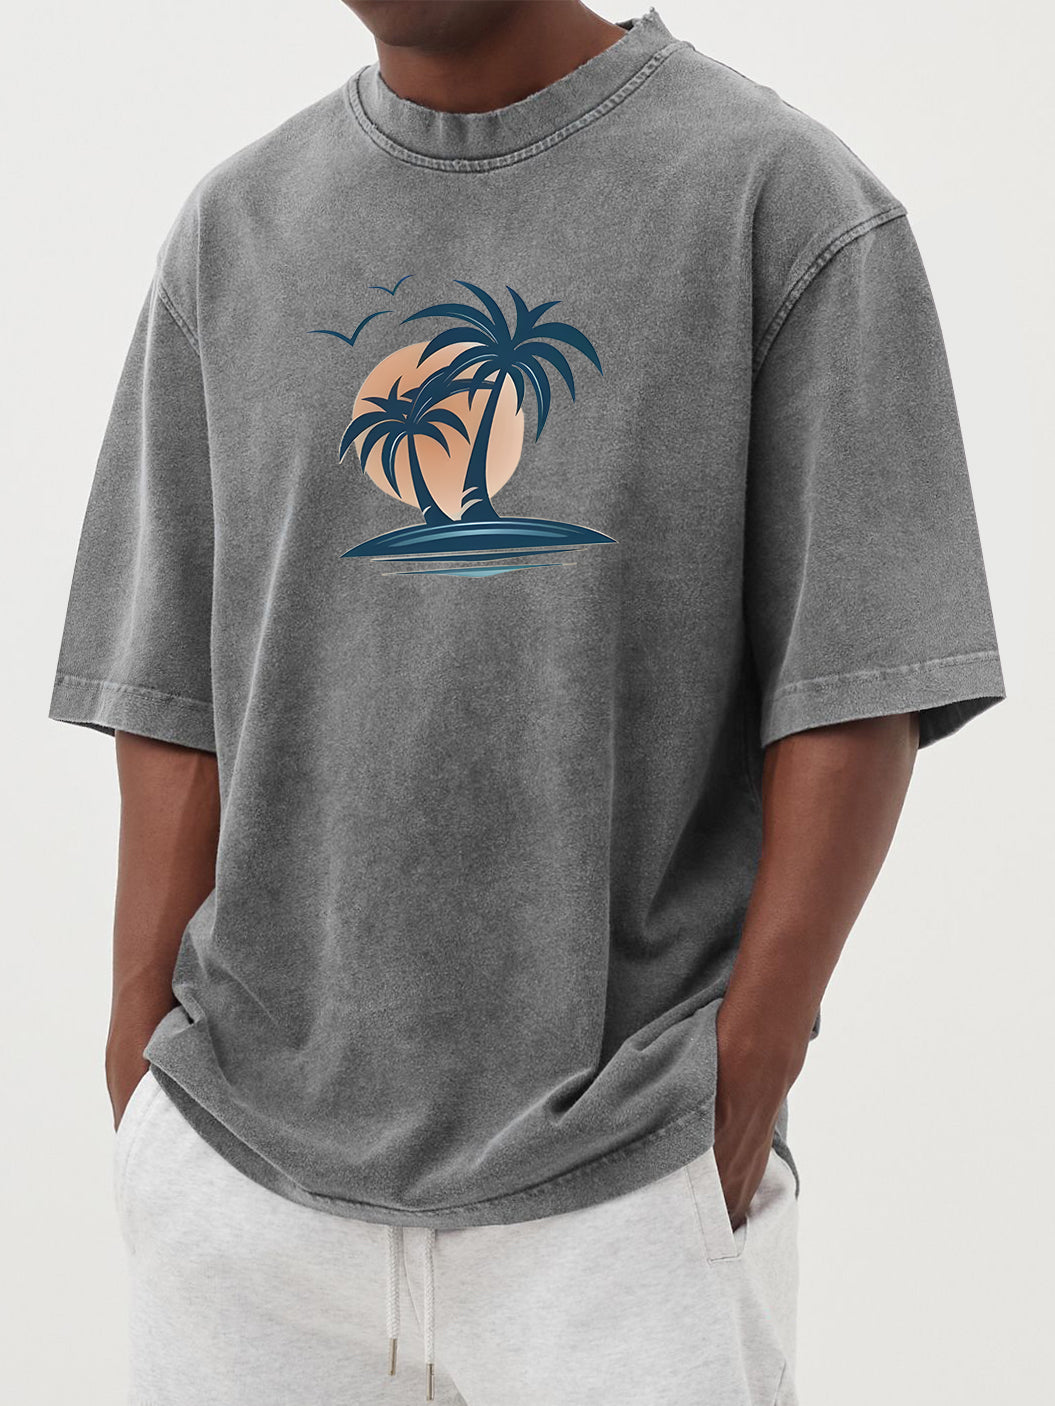 Men's Washed Distressed Cotton Palm Tree Casual Hawaiian Short-sleeved T-shirt